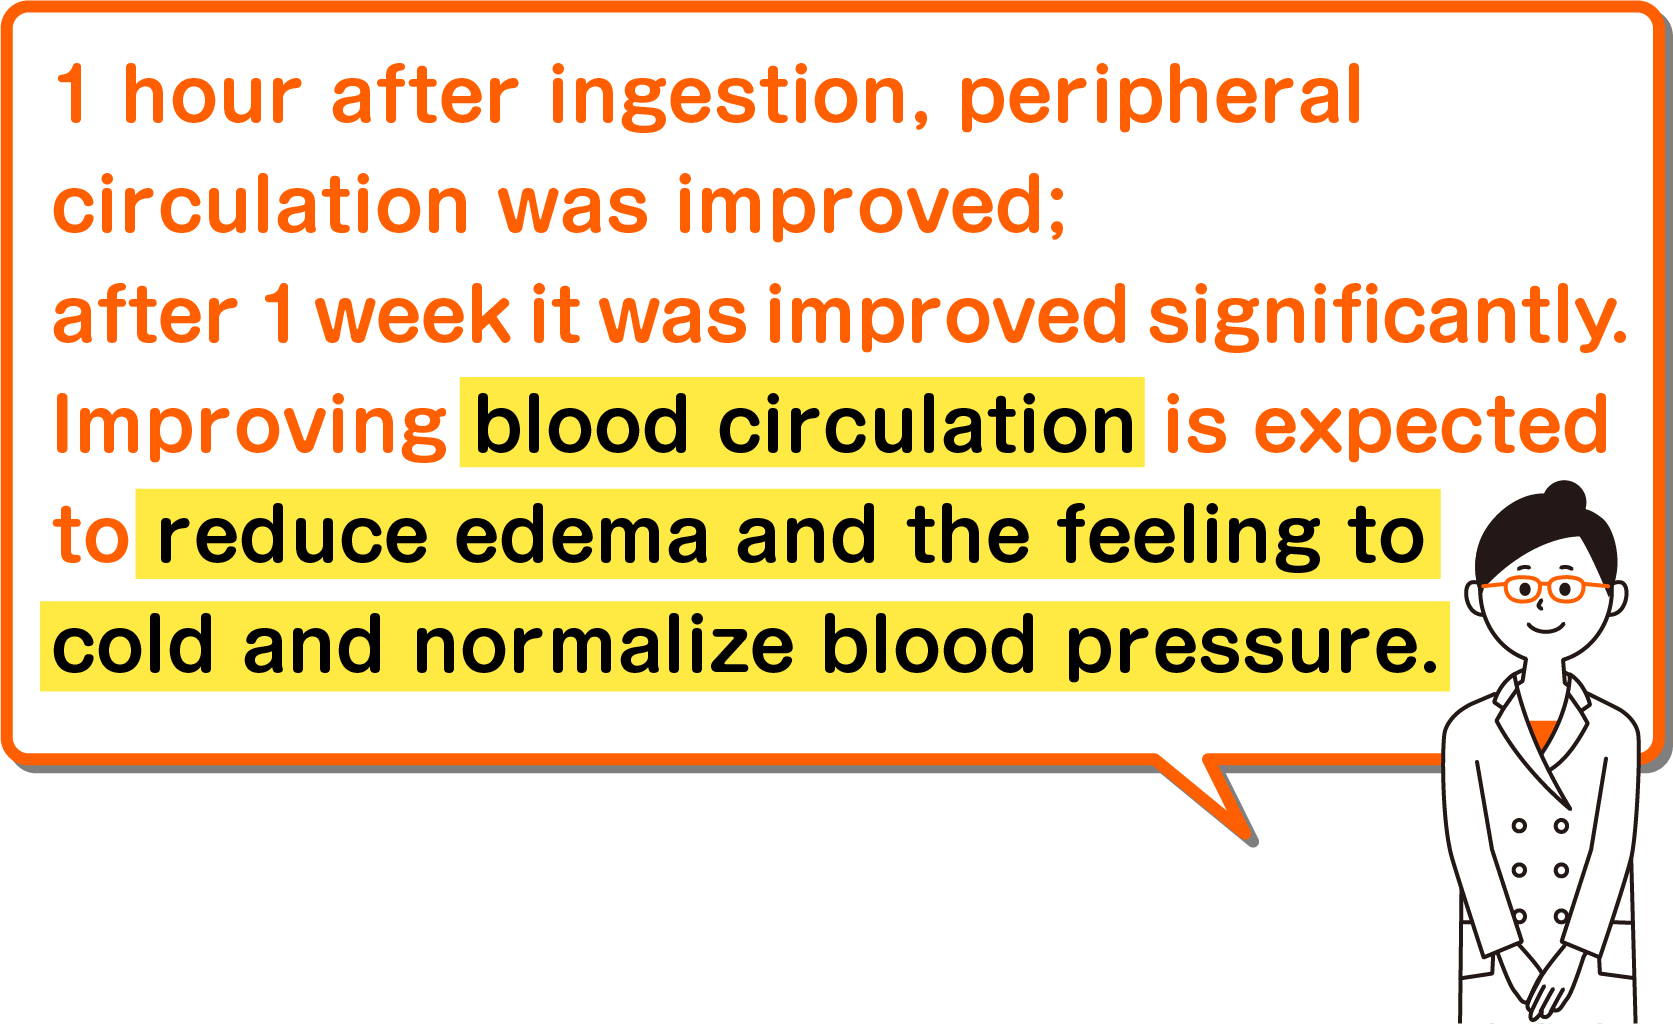 1 hour after ingestion, peripheral circulation was improved; after 1 week it was improved significantly. Improving blood circulation is expected to reduce edema and the feeling to cold and normalize blood pressure.